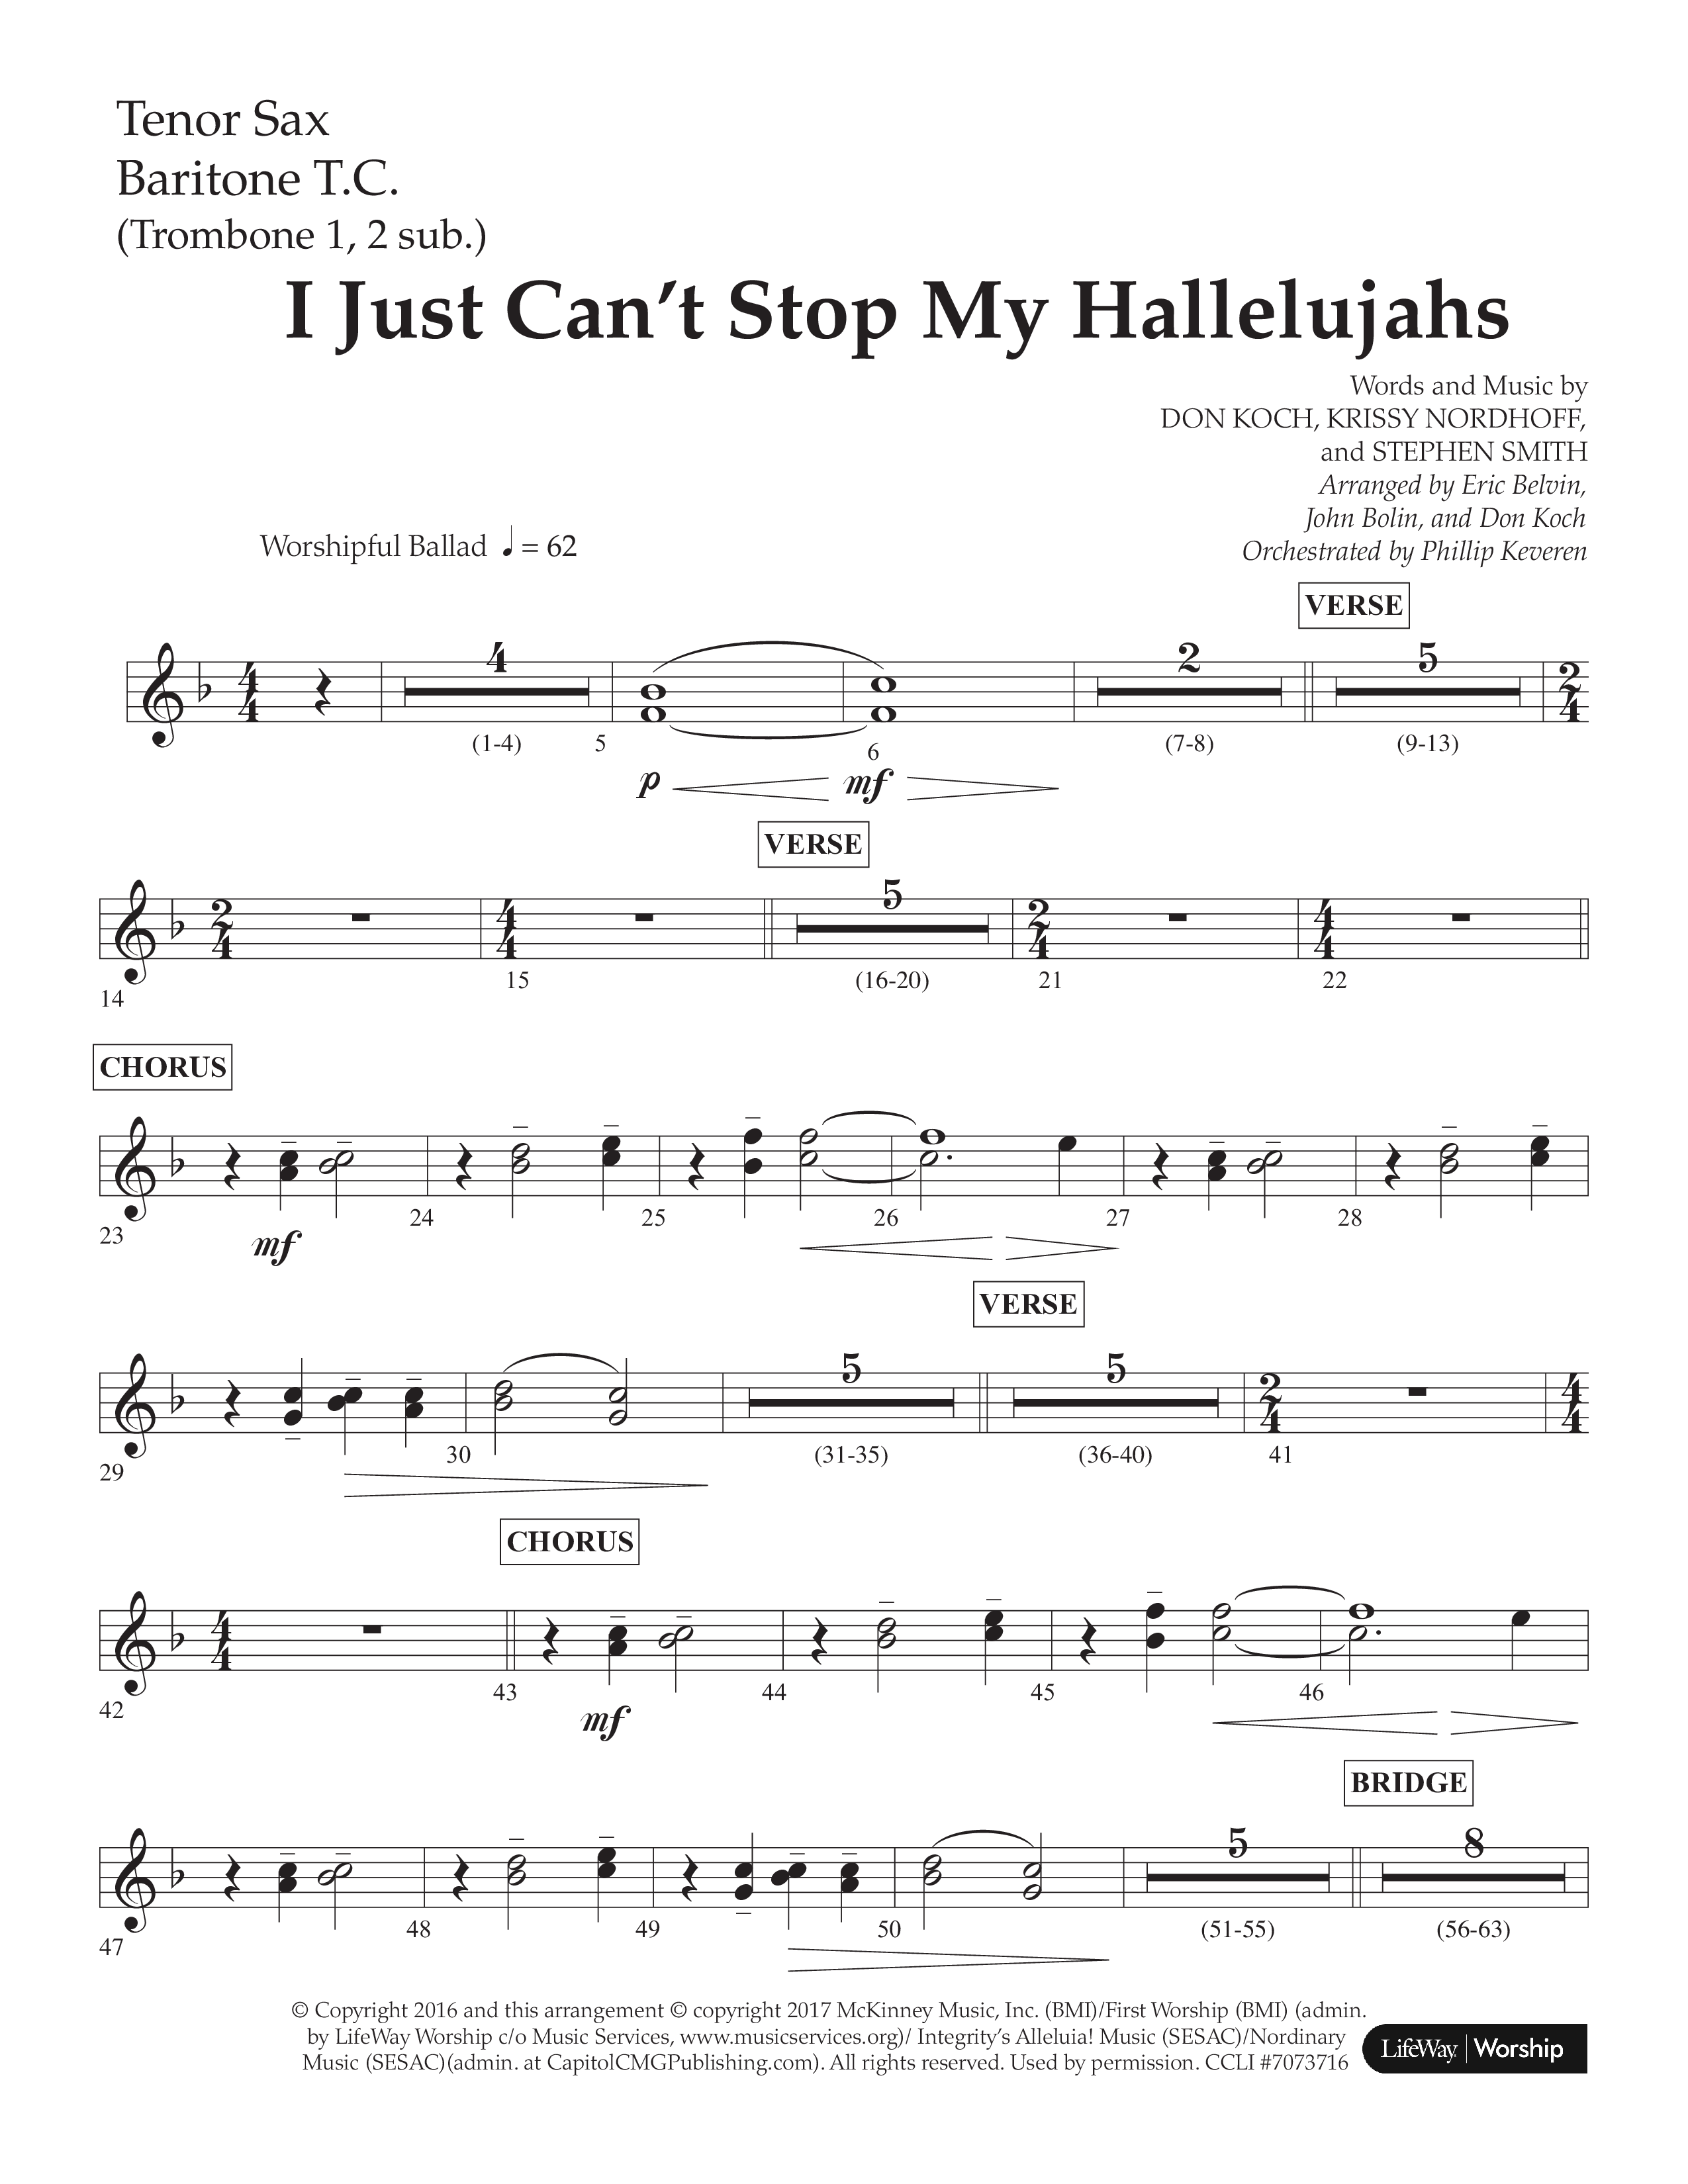 I Just Can’t Stop My Hallelujahs (Choral Anthem SATB) Tenor Sax/Baritone T.C. (Lifeway Choral / Arr. Eric Belvin / Arr. John Bolin / Arr. Don Koch / Orch. Phillip Keveren)